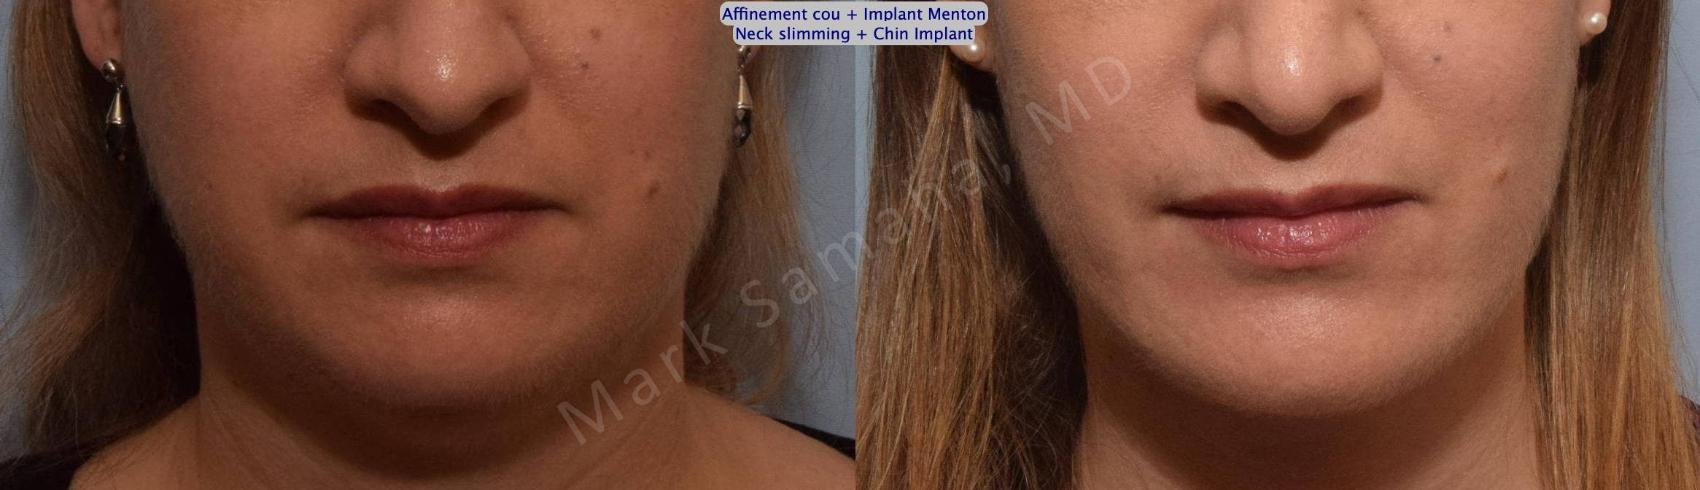 Before & After Chirurgie d'affinement du visage / Face slimming-Face contouring Case 161 Front View in Mount Royal, QC